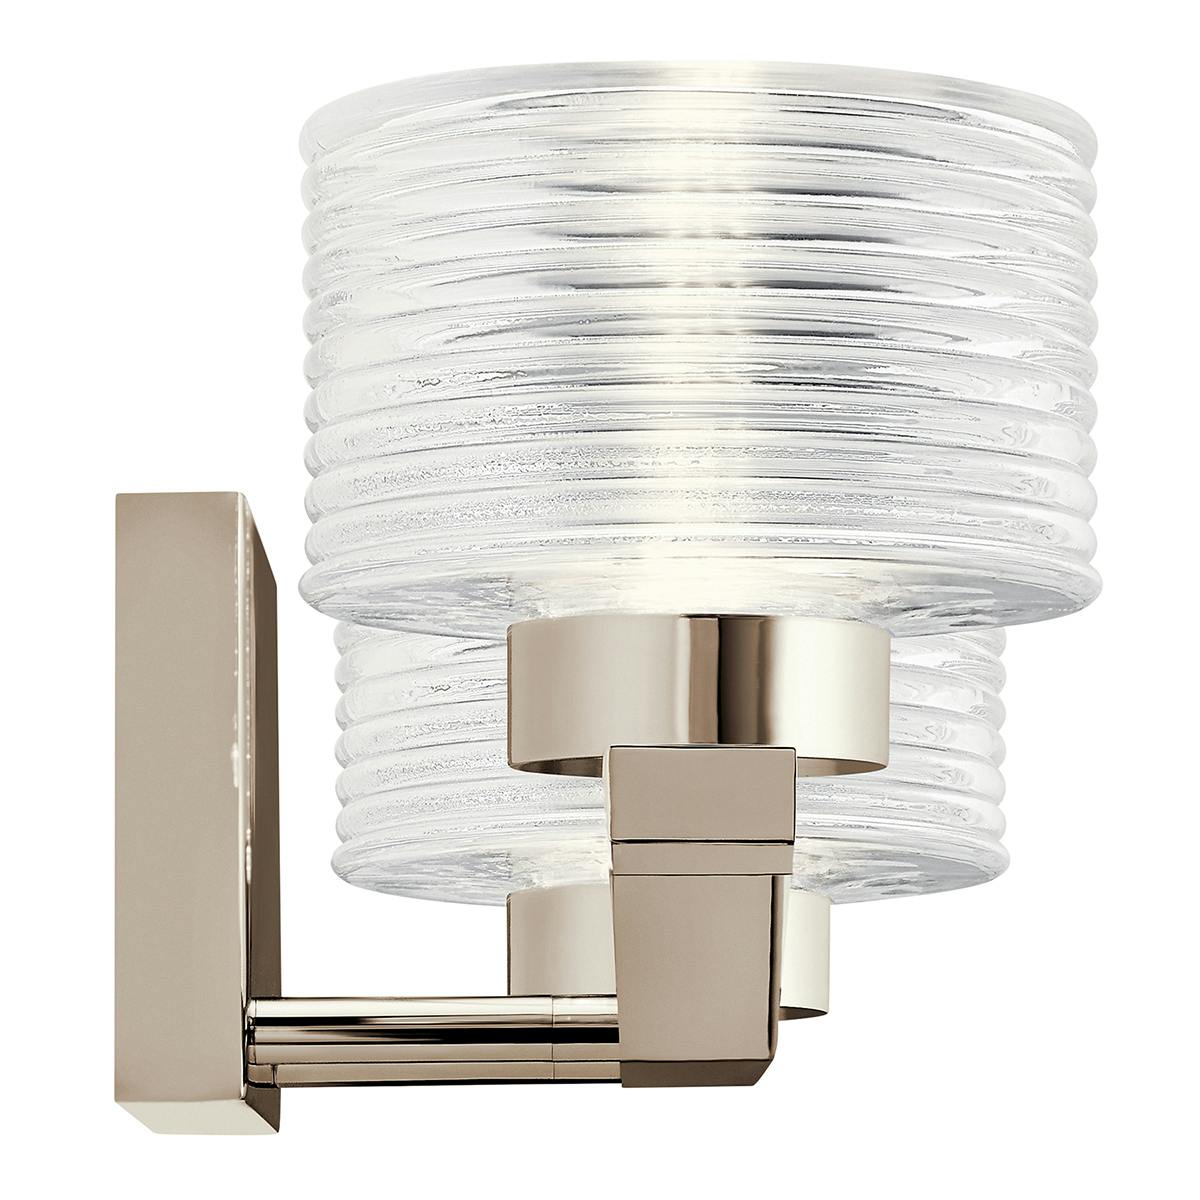 Profile view of the Lasus™ 3 Light LED Vanity Light on a white background